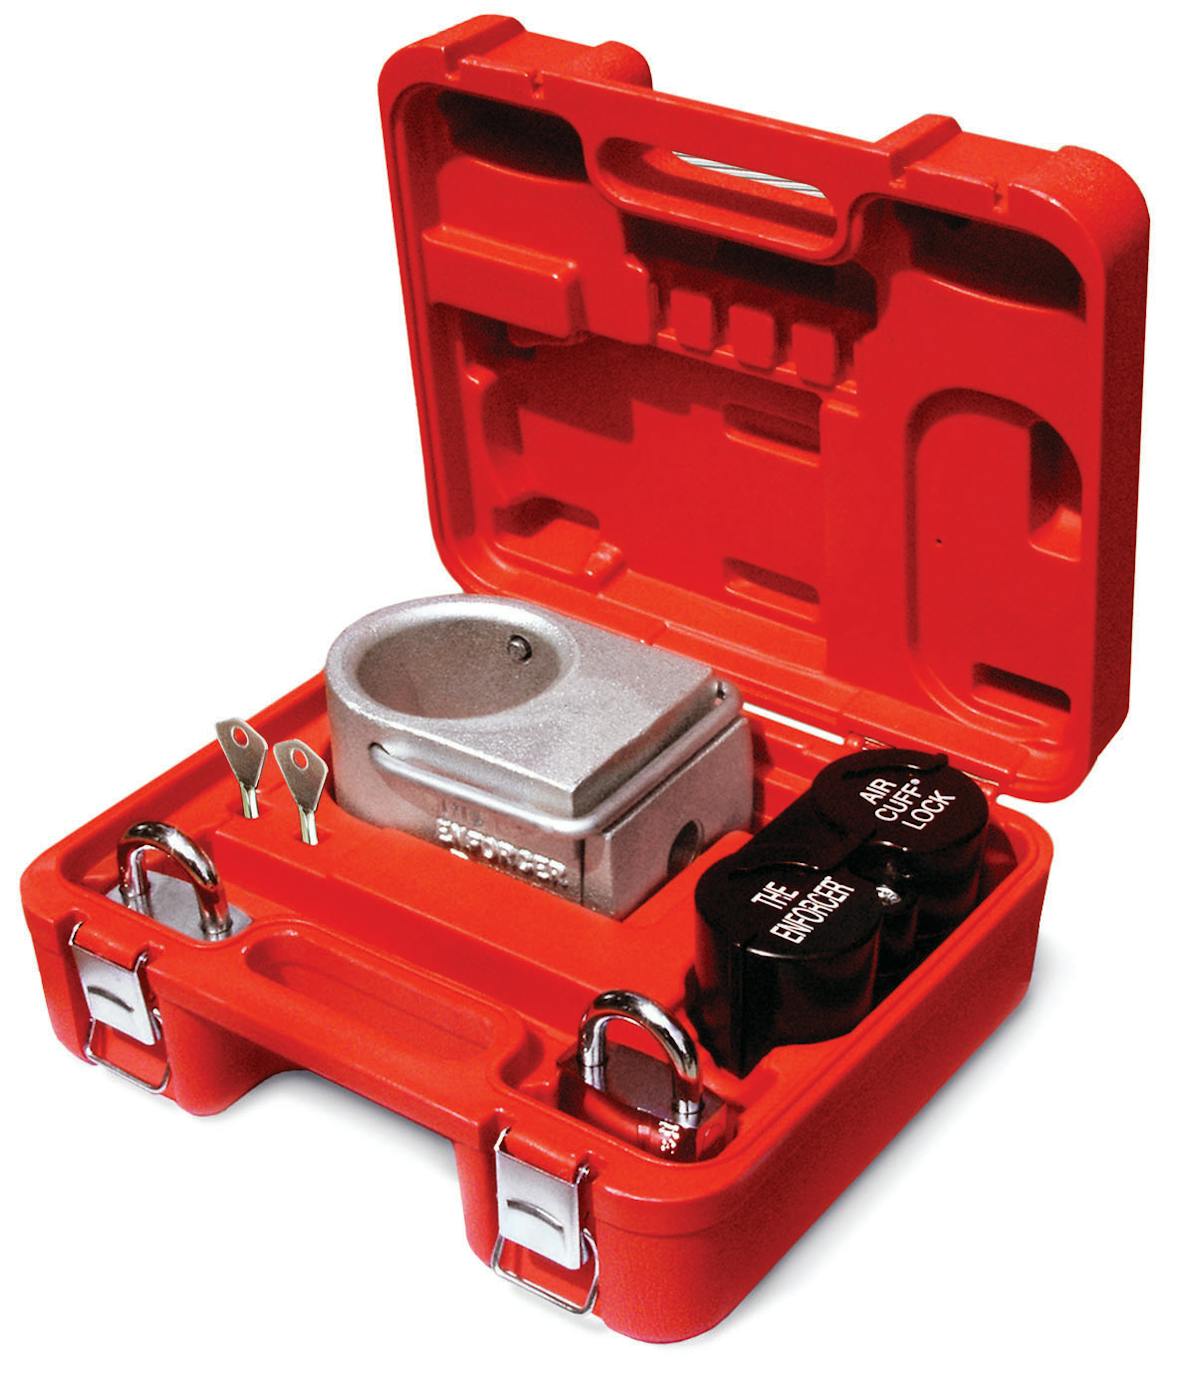 Abloy&rsquo;s Enforcer Security Kit holds a kingpin lock, air cuff locks to secure air valve levers and prevent brake release, and advanced padlocks.